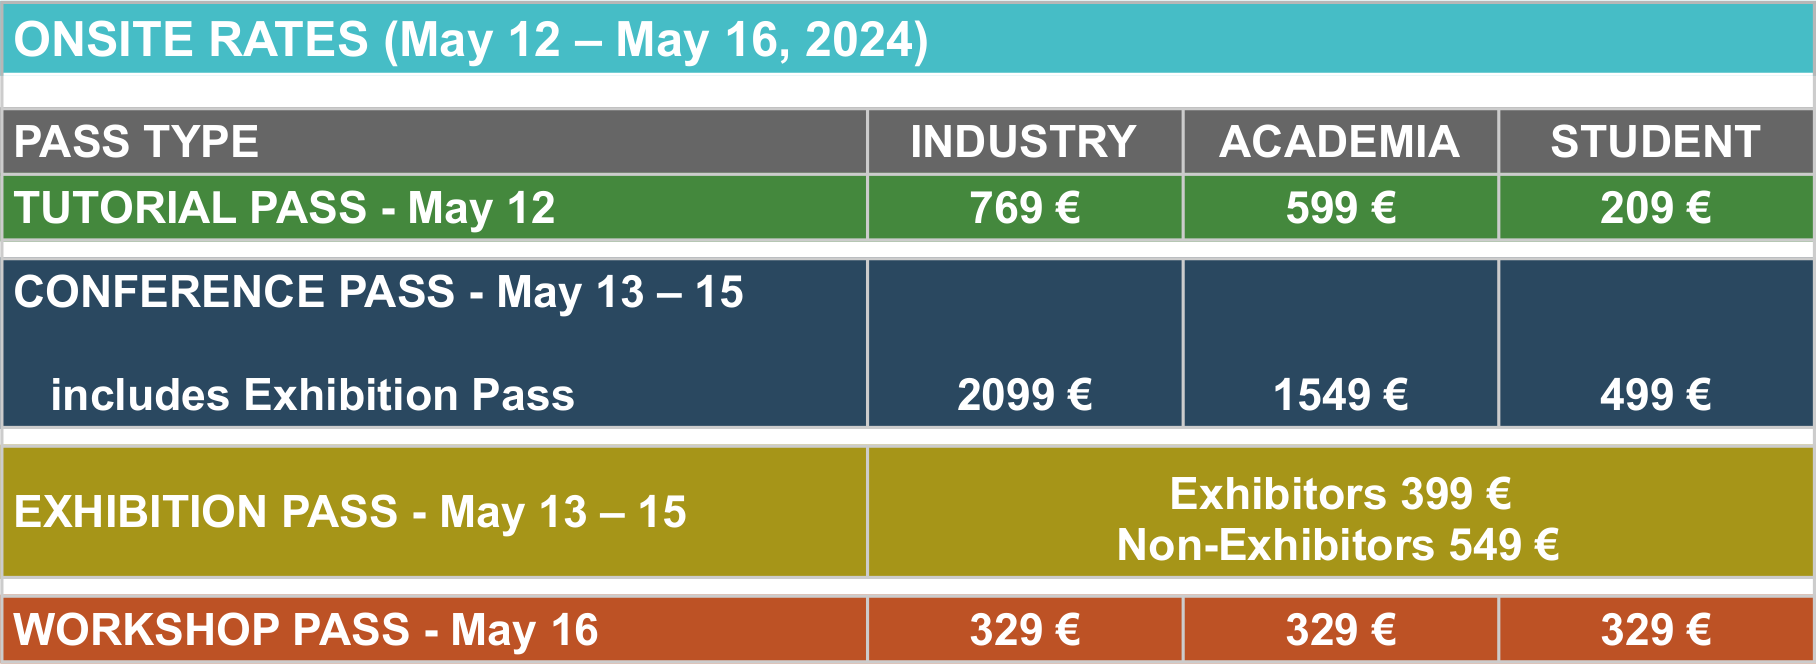 ISC 2024 Pass Prices Onsite